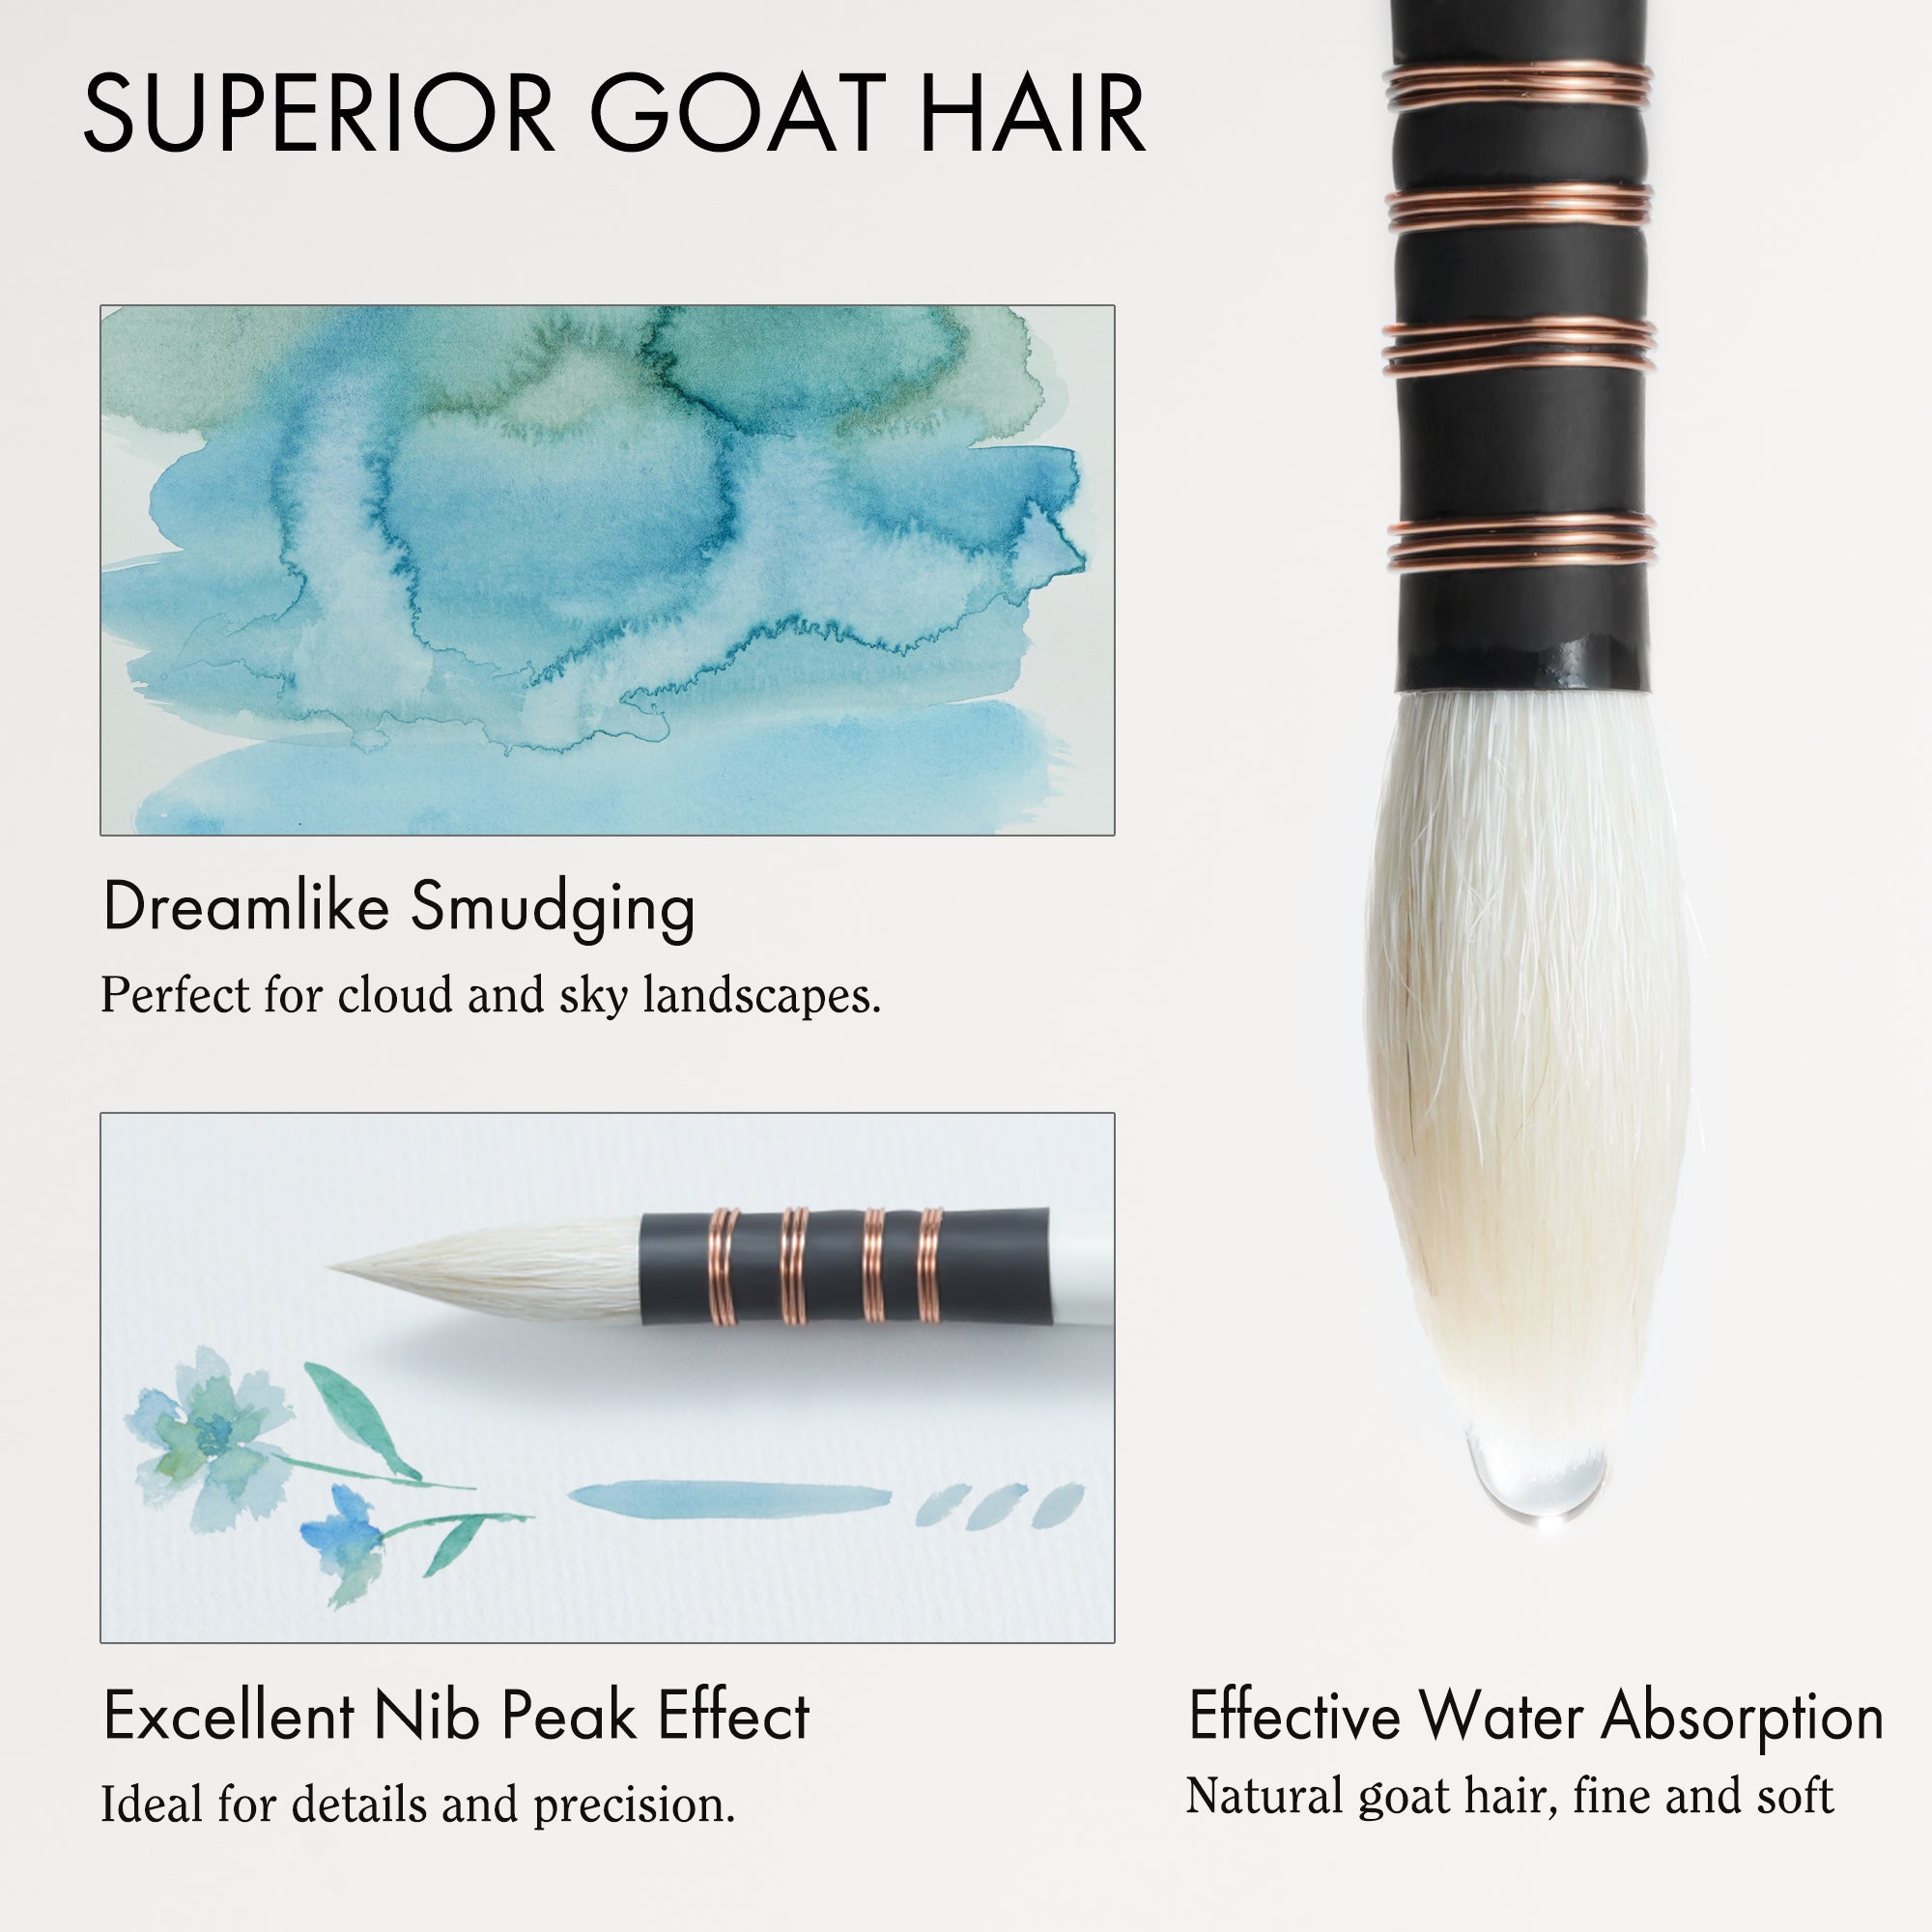 Watercolor: Brushes II: Synthetic vs Natural Hair